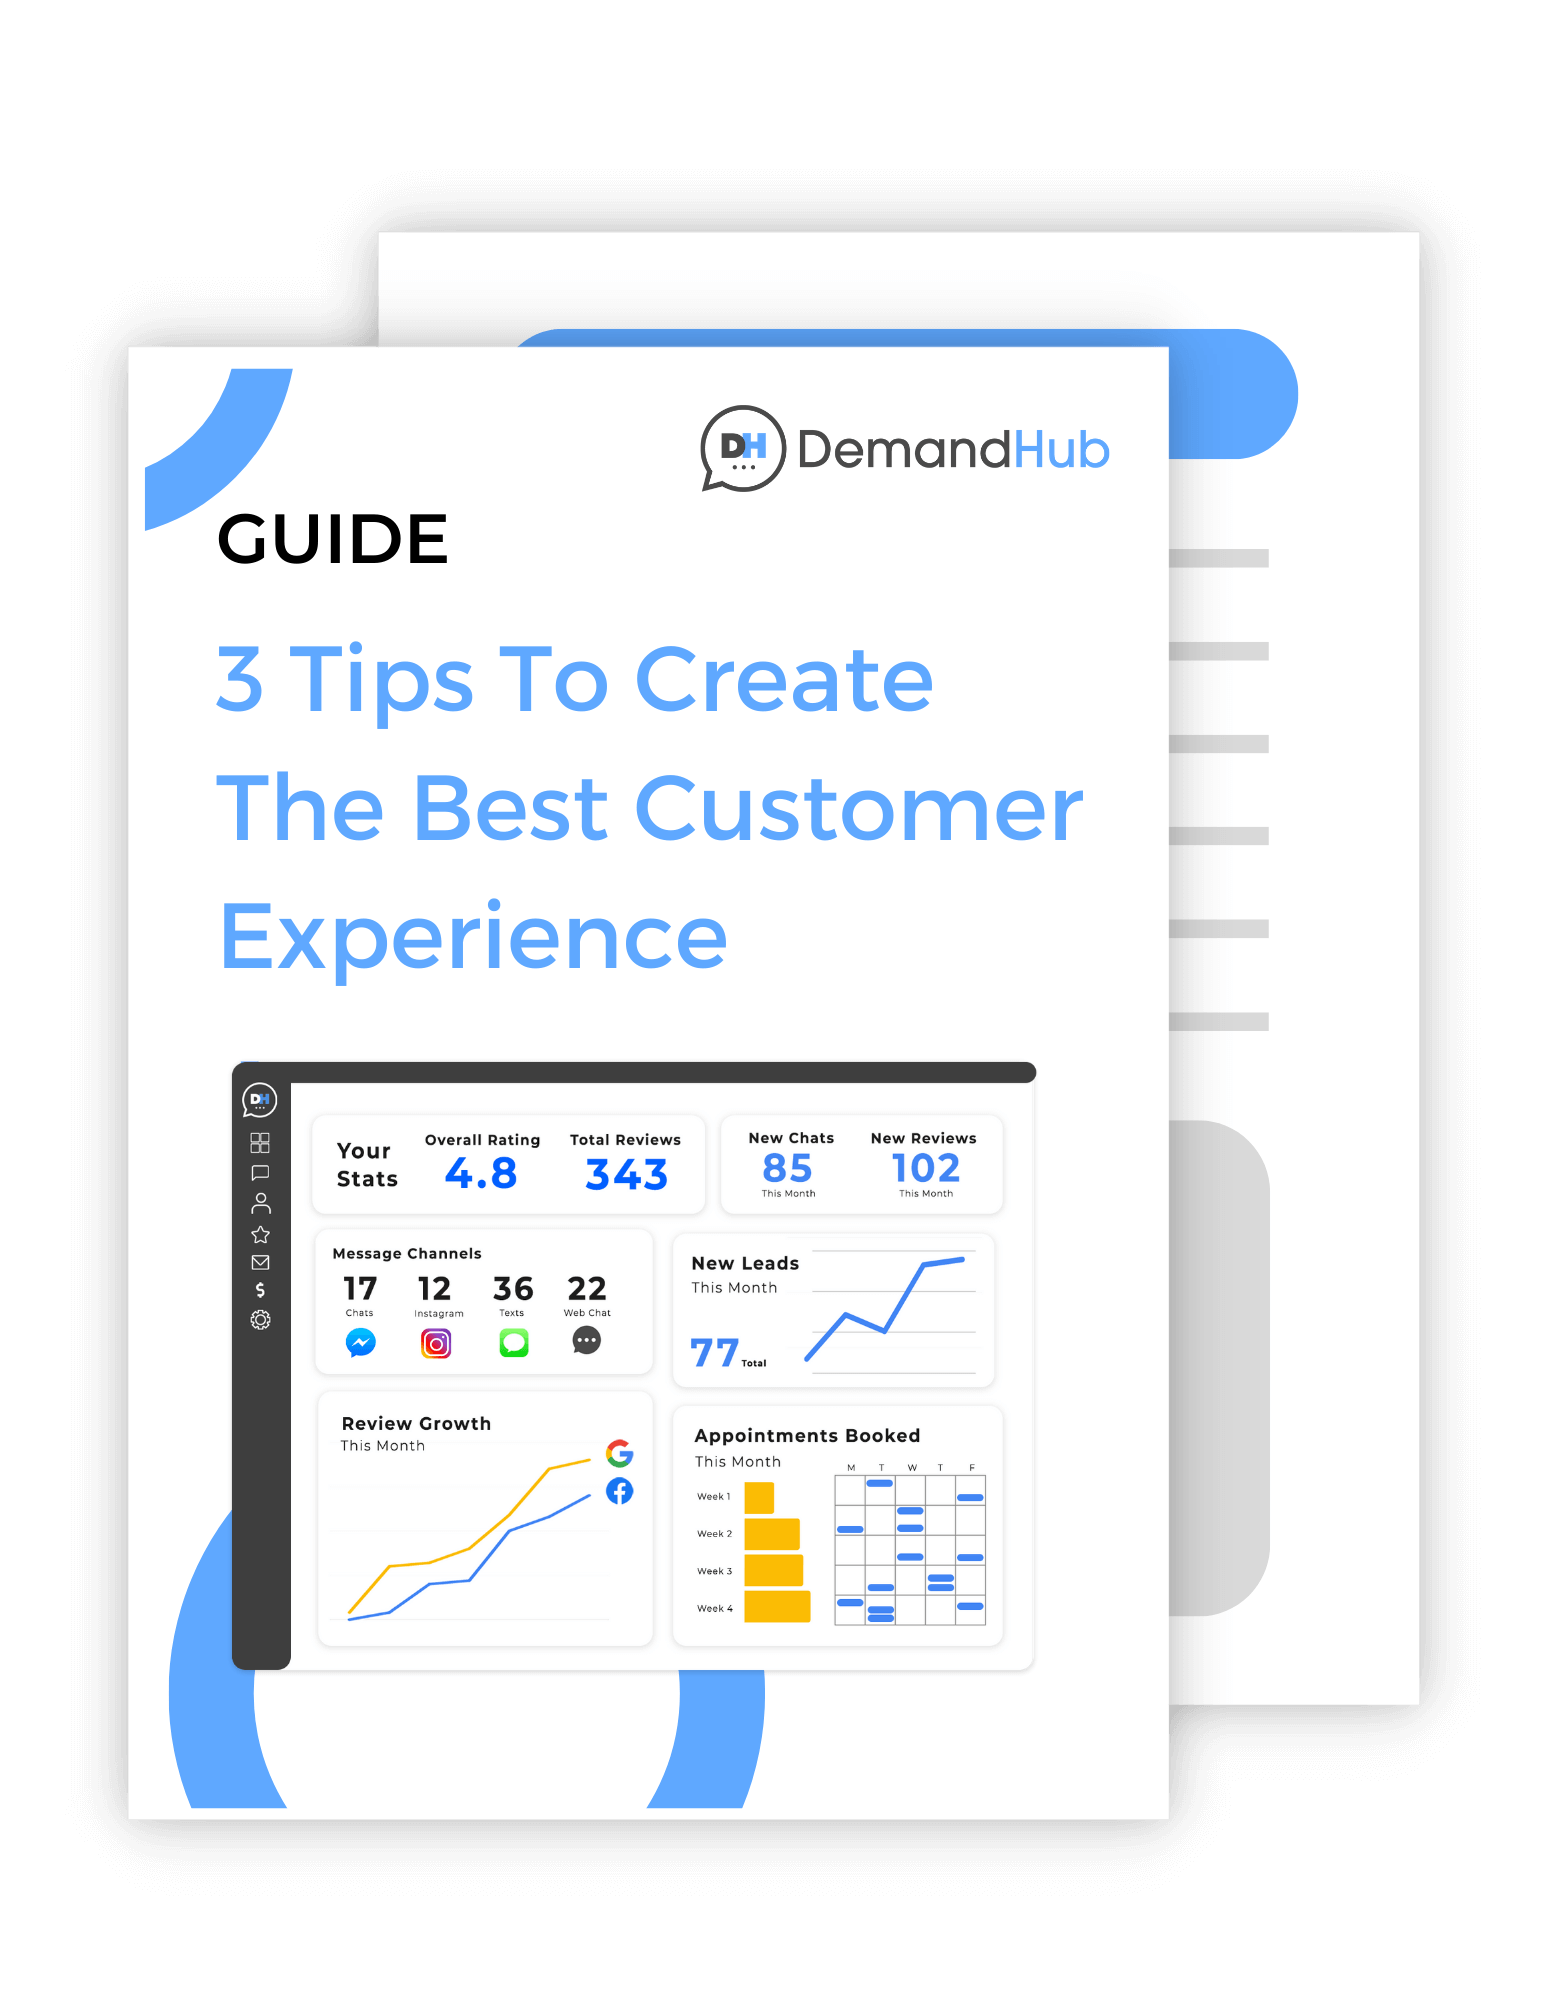 3 Tips You Can Implement Today to Build the Best Customer Experience